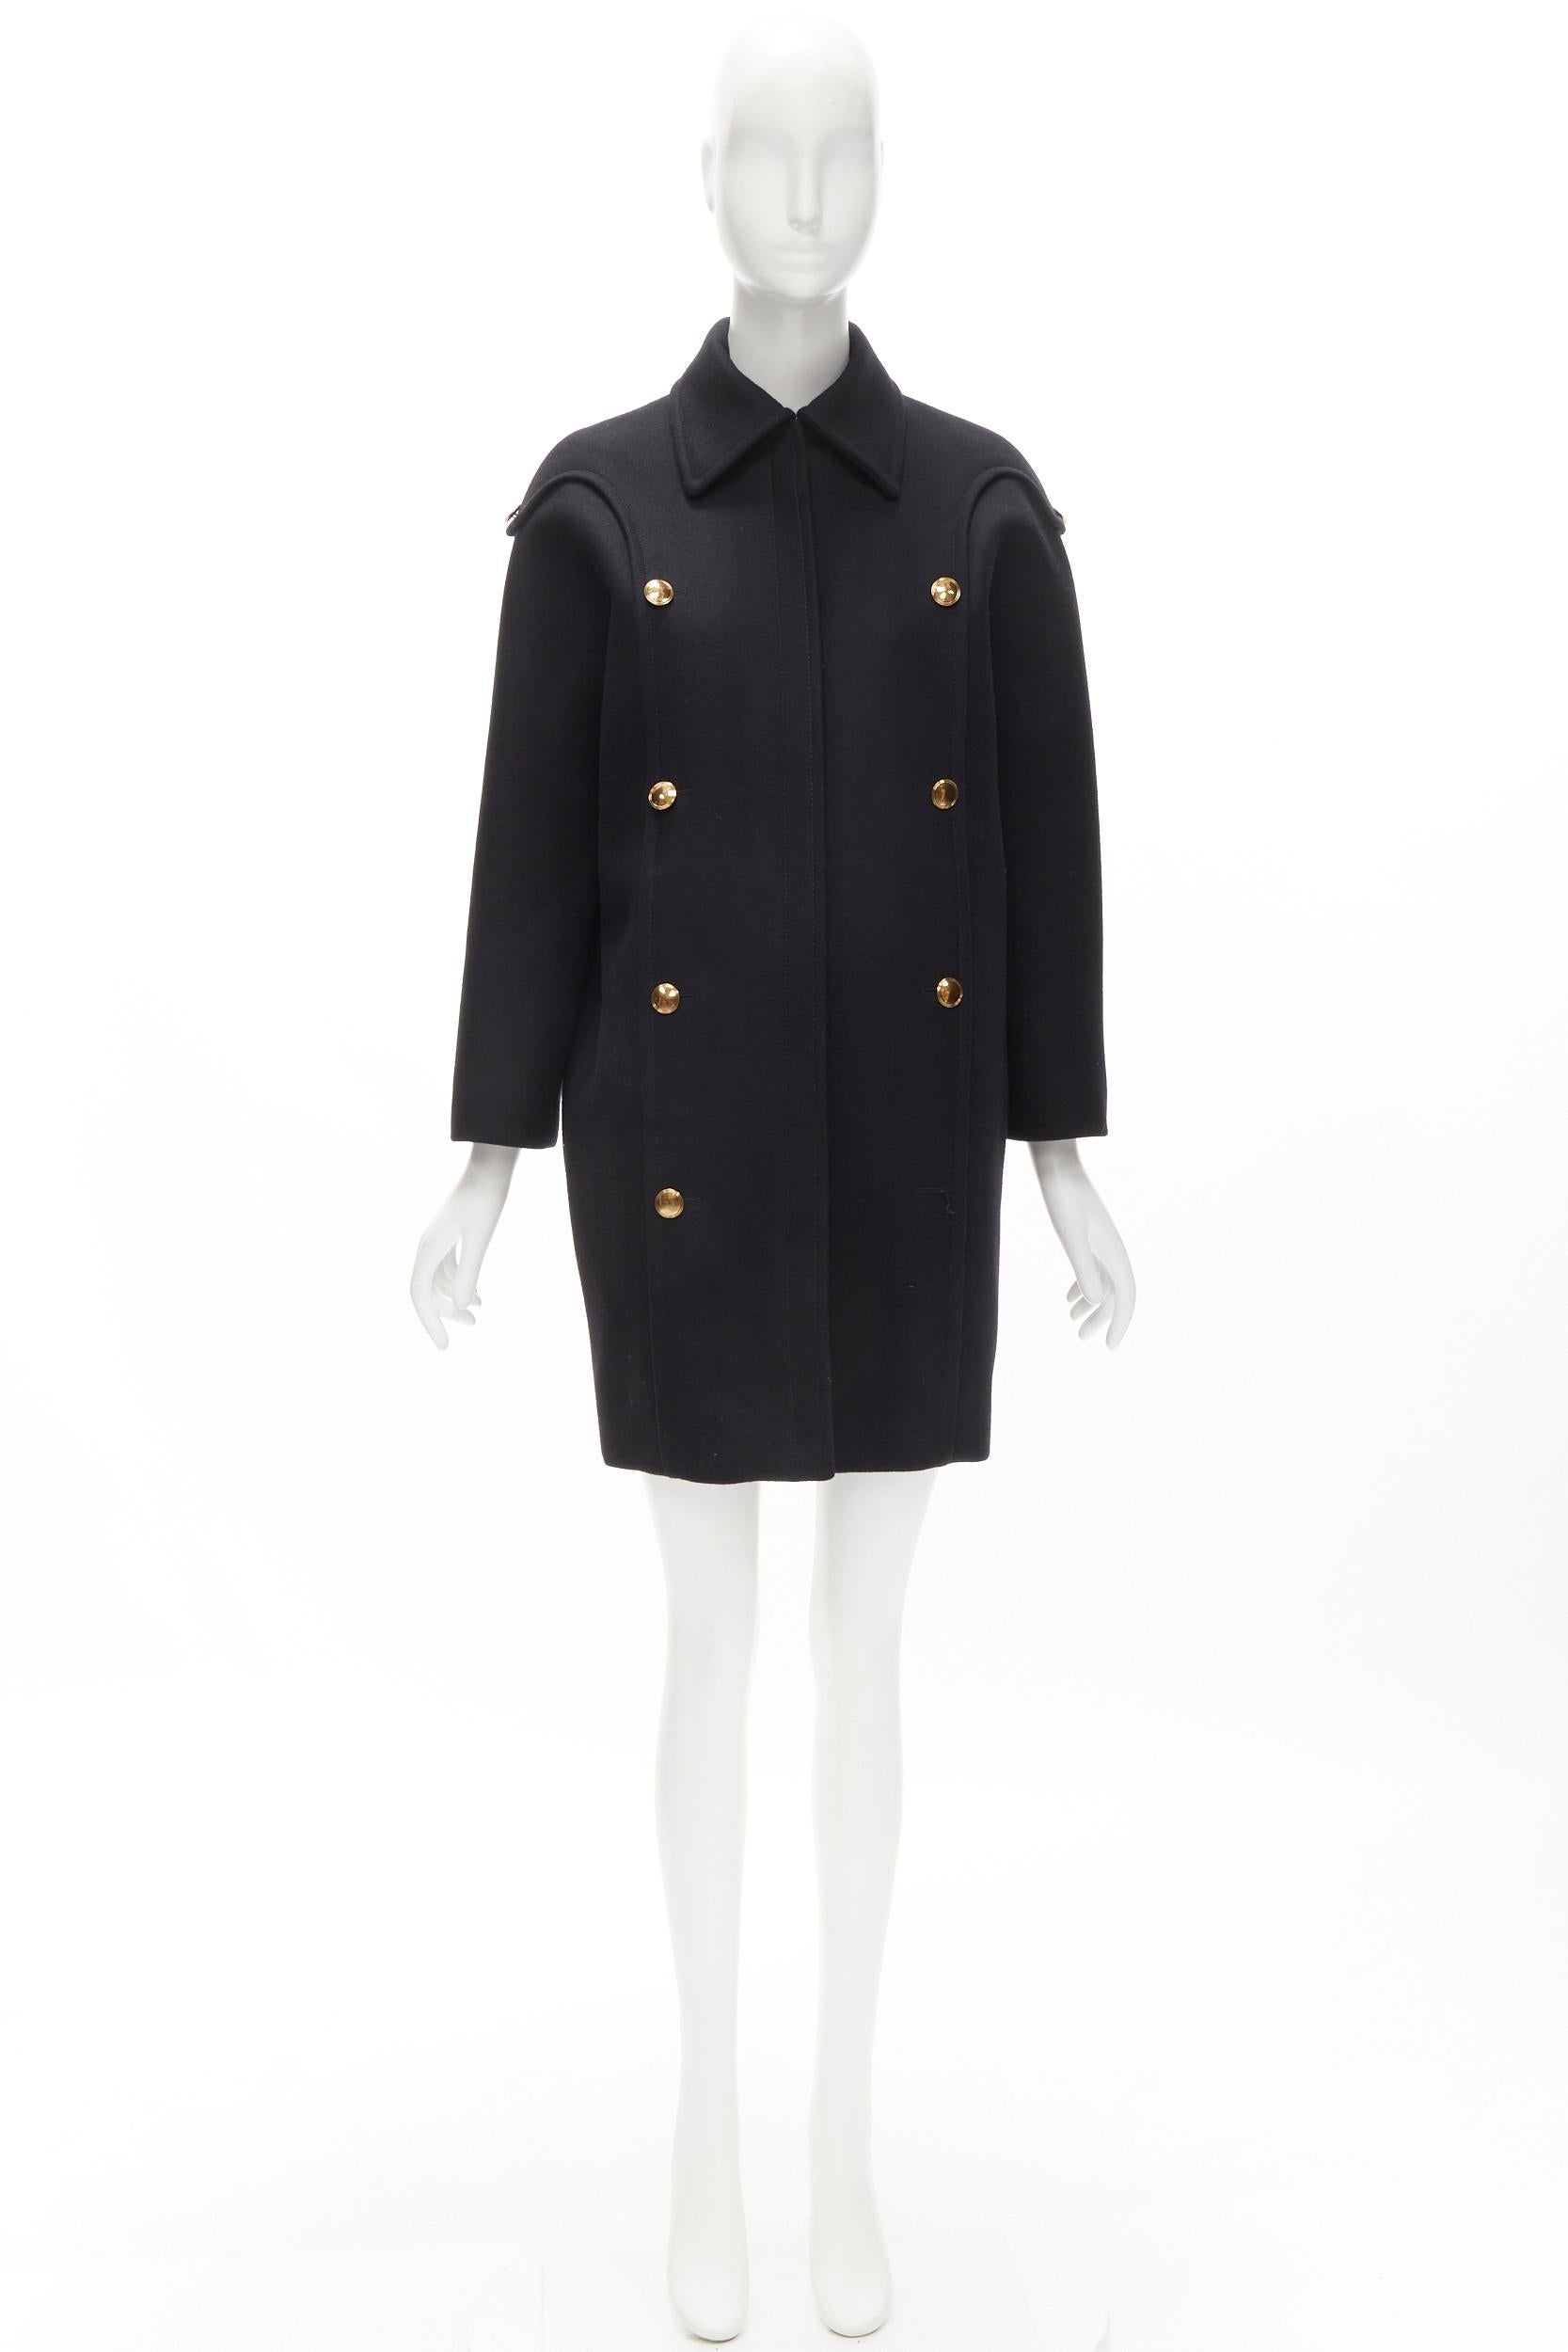 GUCCI 2012 black wool gold buttons zip front cocoon military coat IT38 XS 7